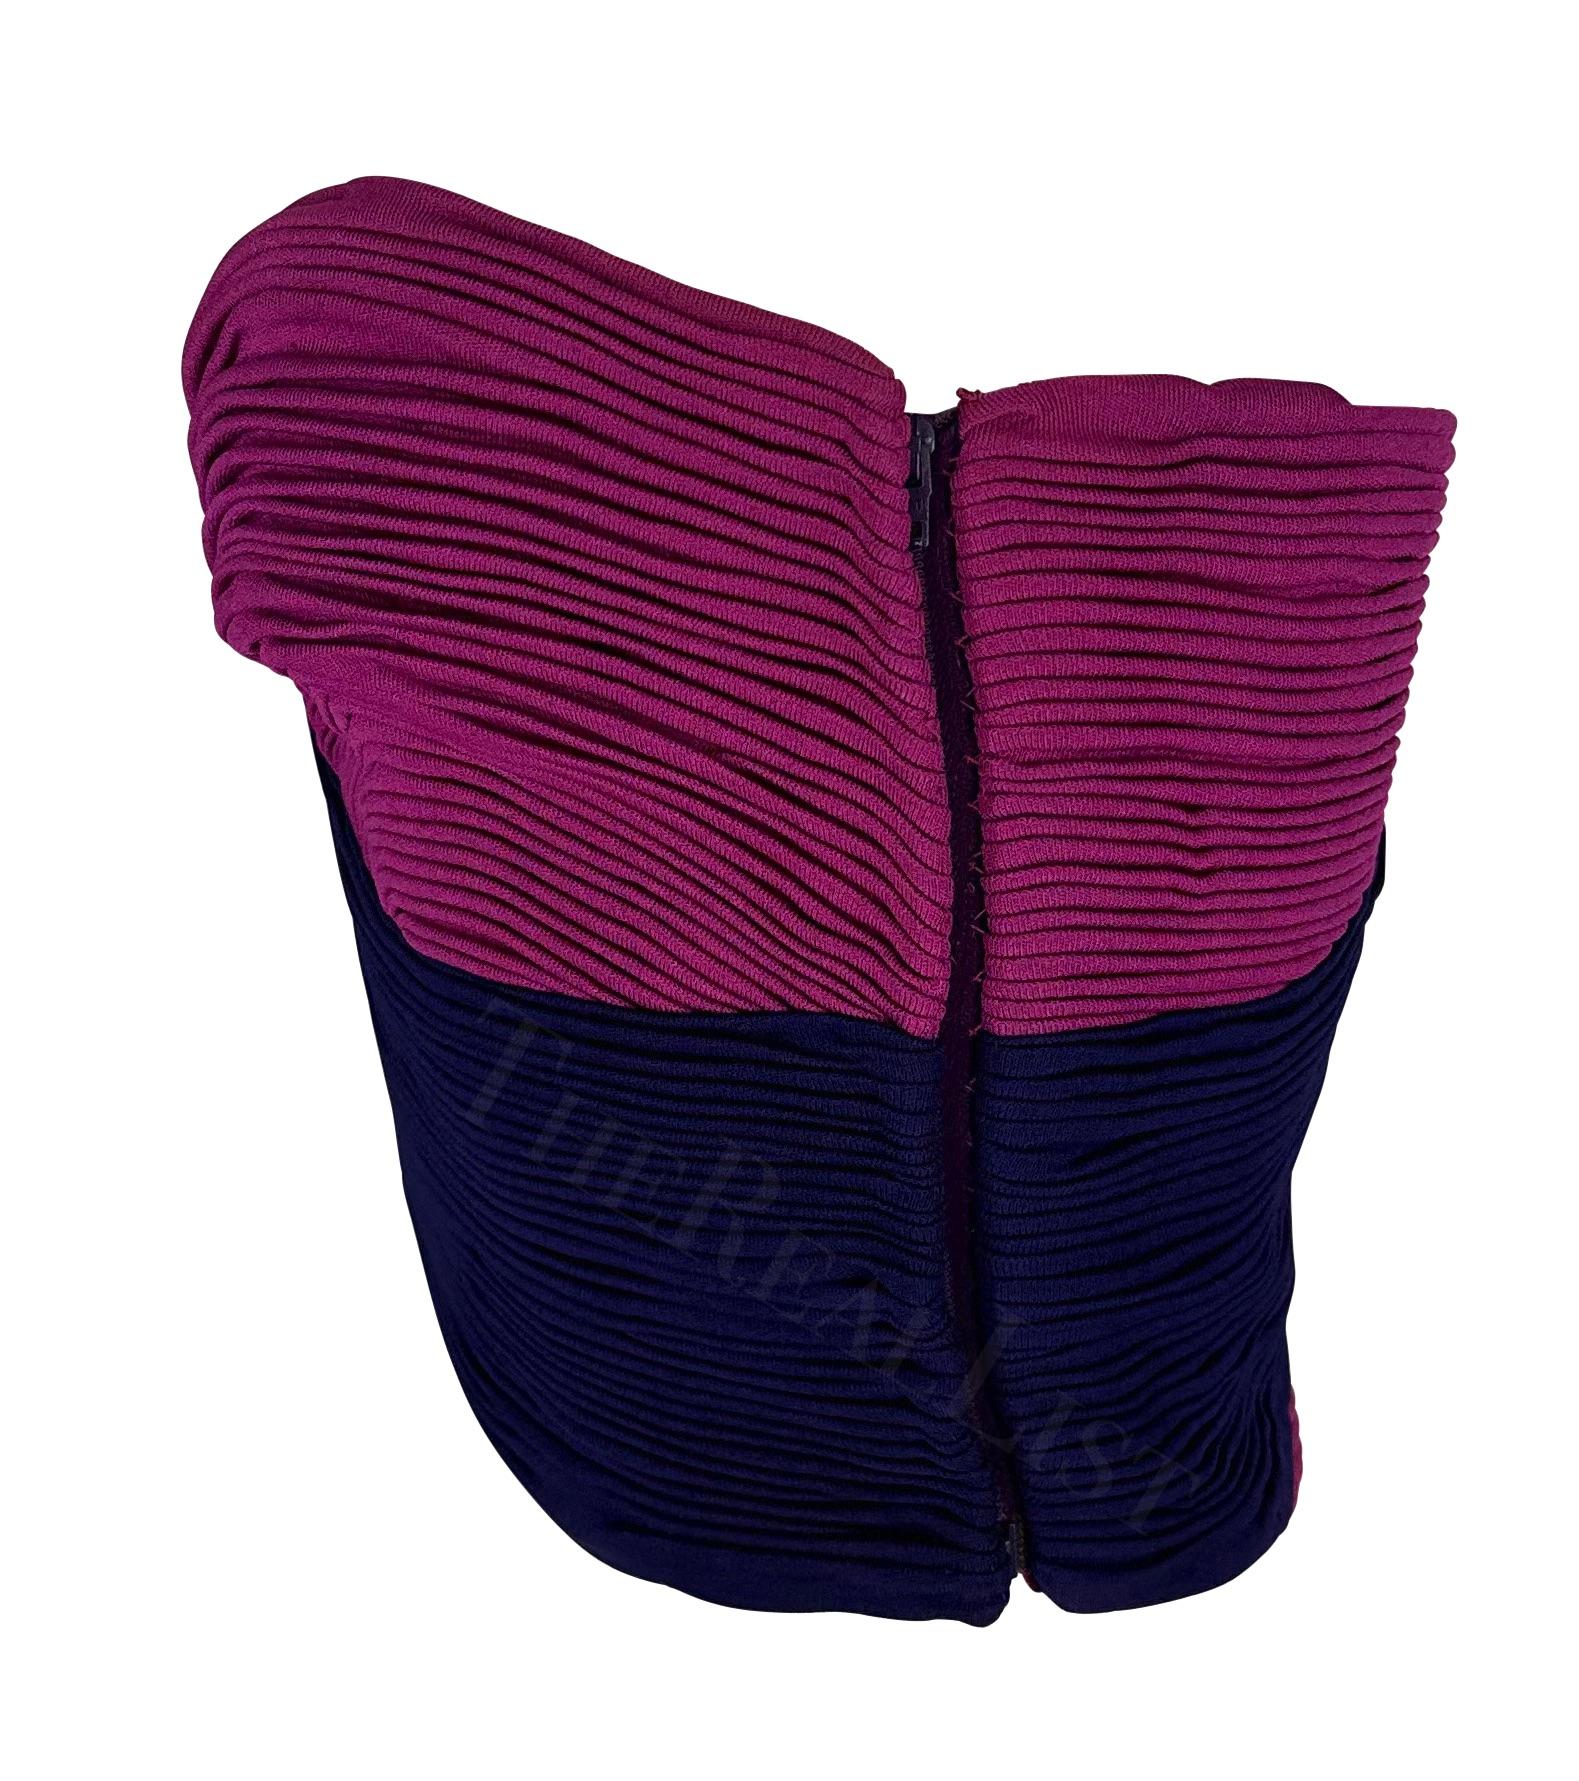 S/S 1990 Gianni Versace Purple and Pink Ruched Bustier Crop Top  In Excellent Condition For Sale In West Hollywood, CA